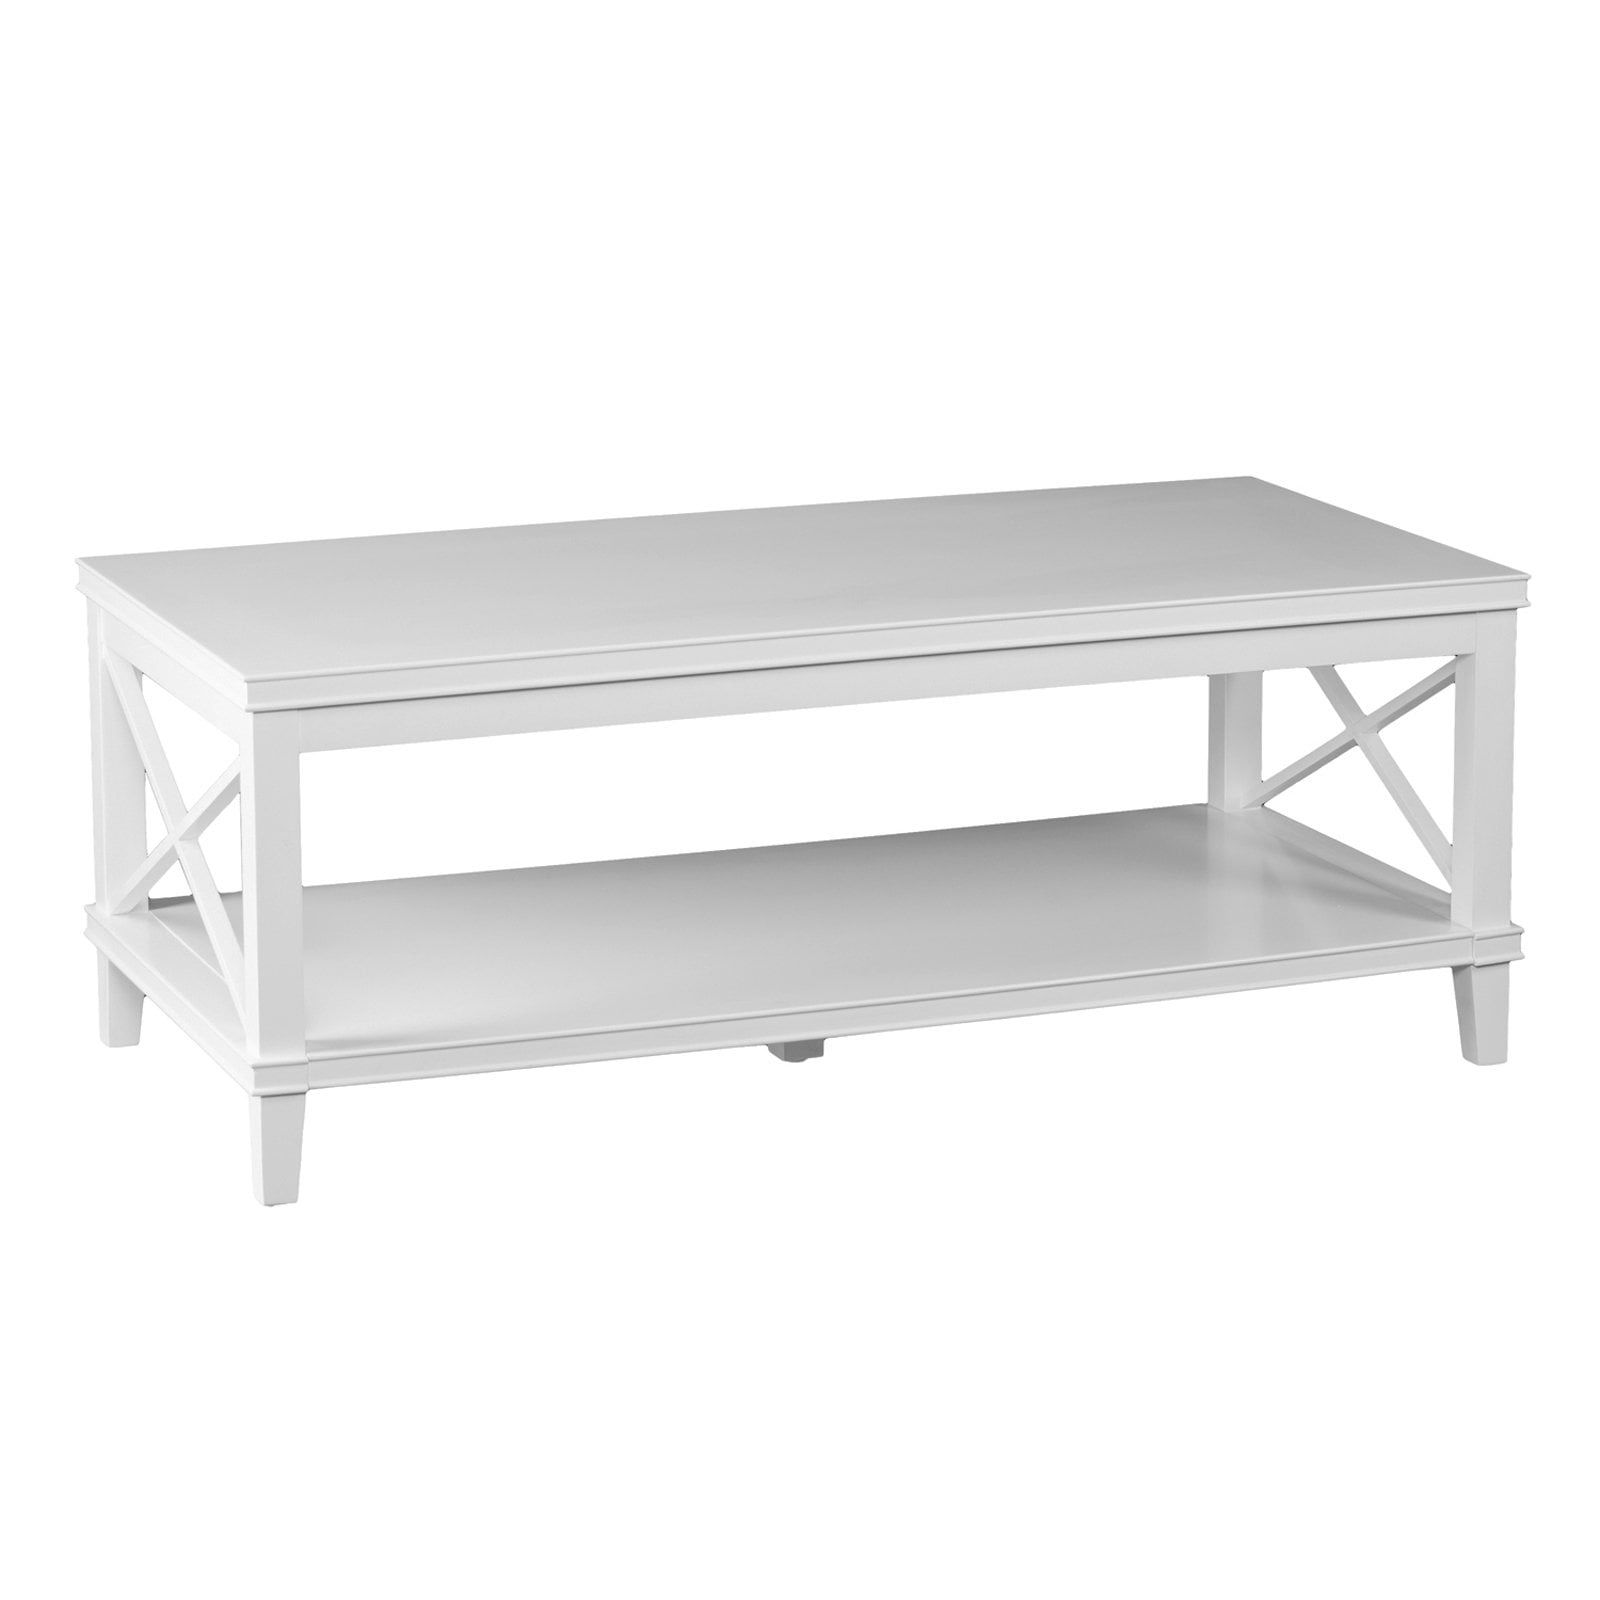 Southern Enterprises Larksmill Coffee Table – Walmart Throughout Southern Enterprises Larksmill Coffee Tables (View 3 of 5)